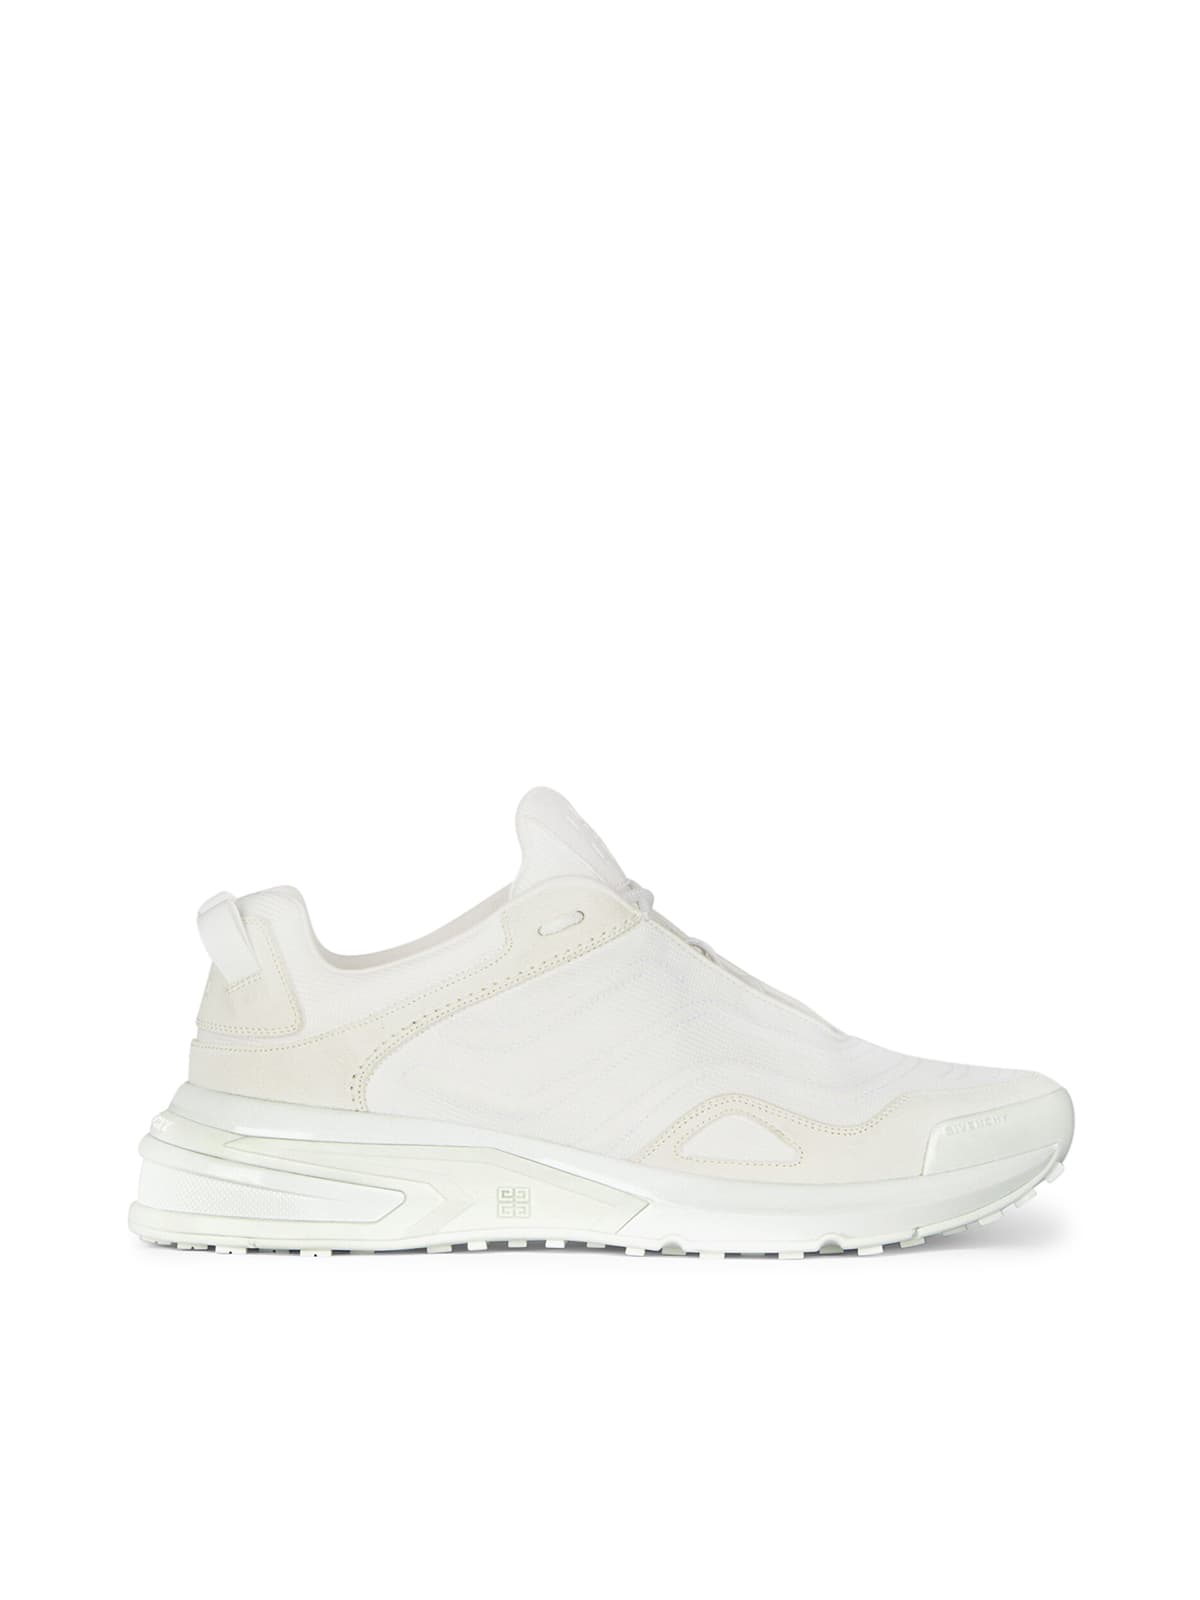 Givenchy Giv 1 Light Sneakers